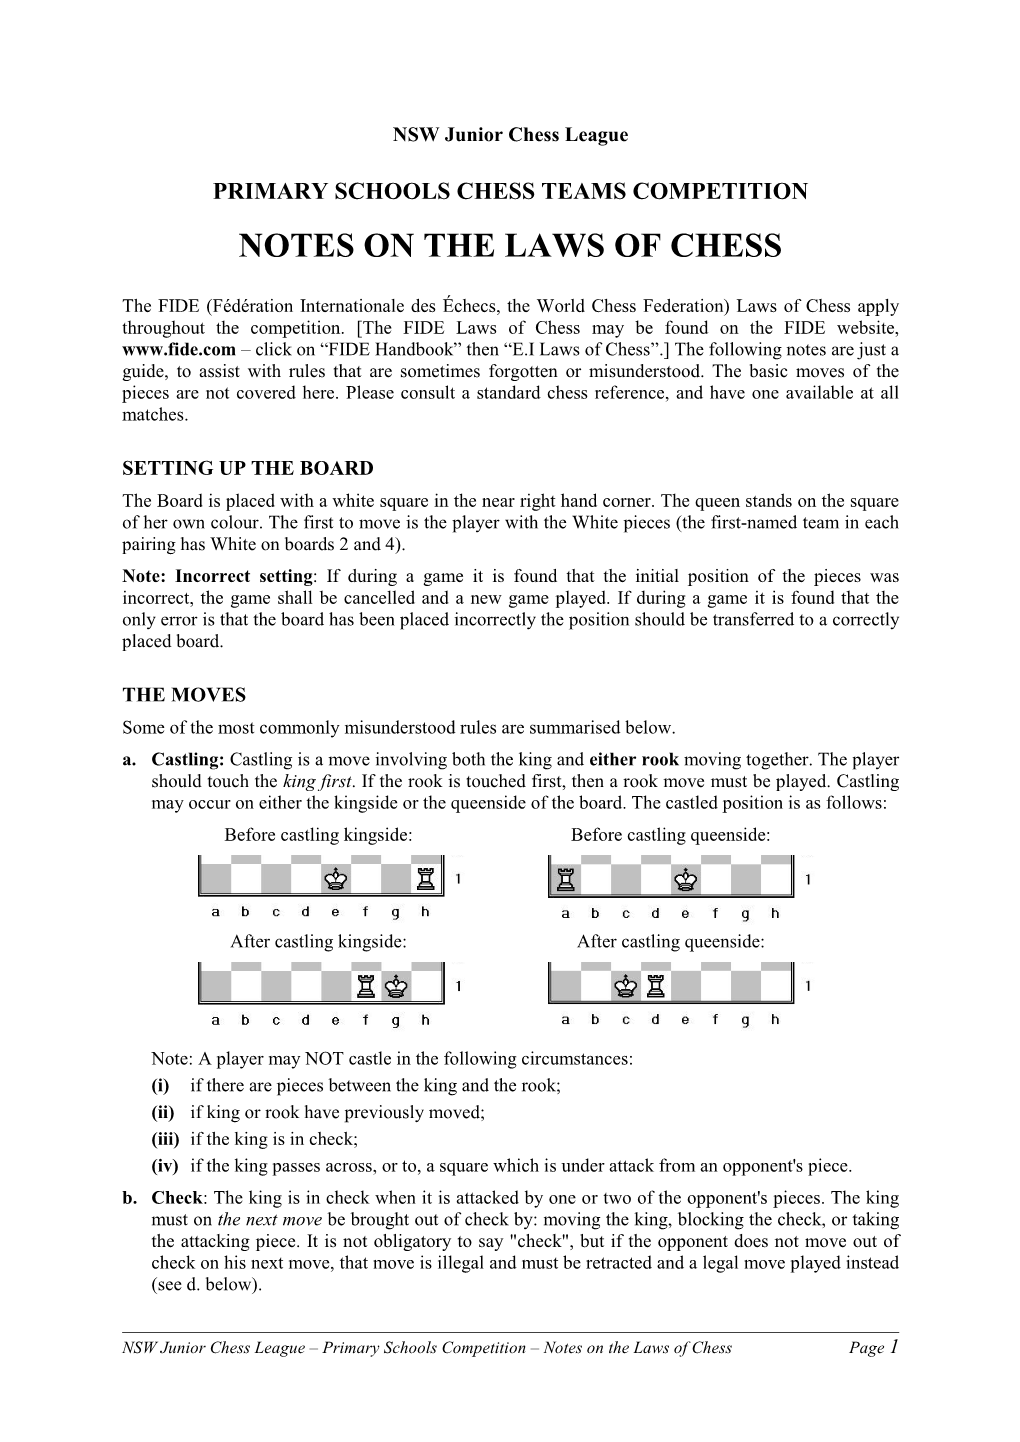 Notes on the Laws of Chess